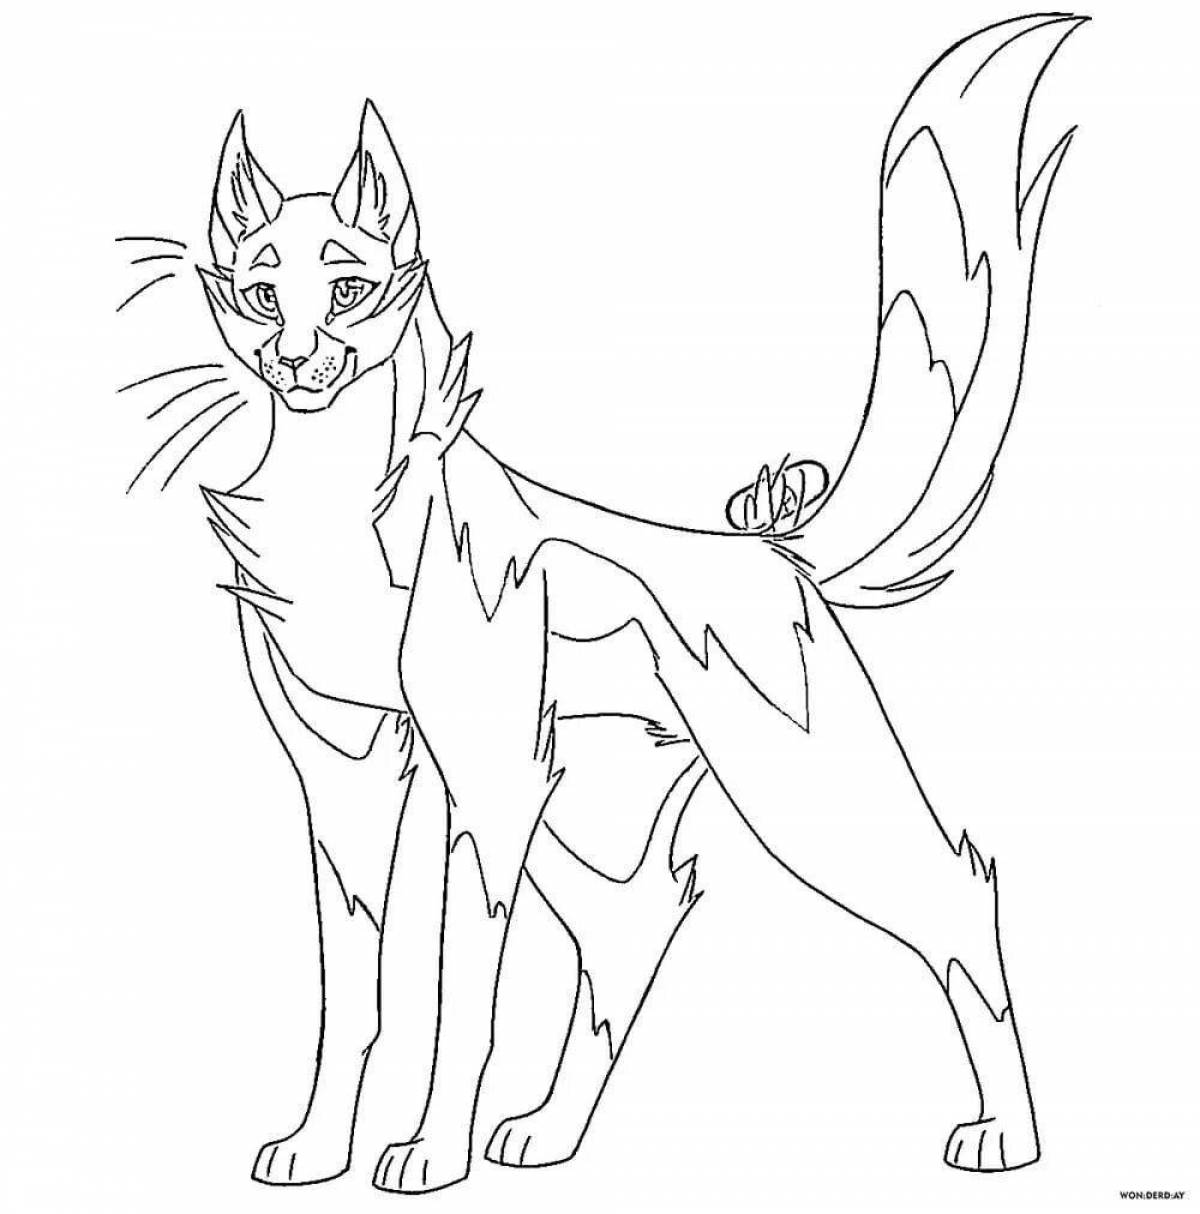 Intriguing firestar warrior cats coloring page